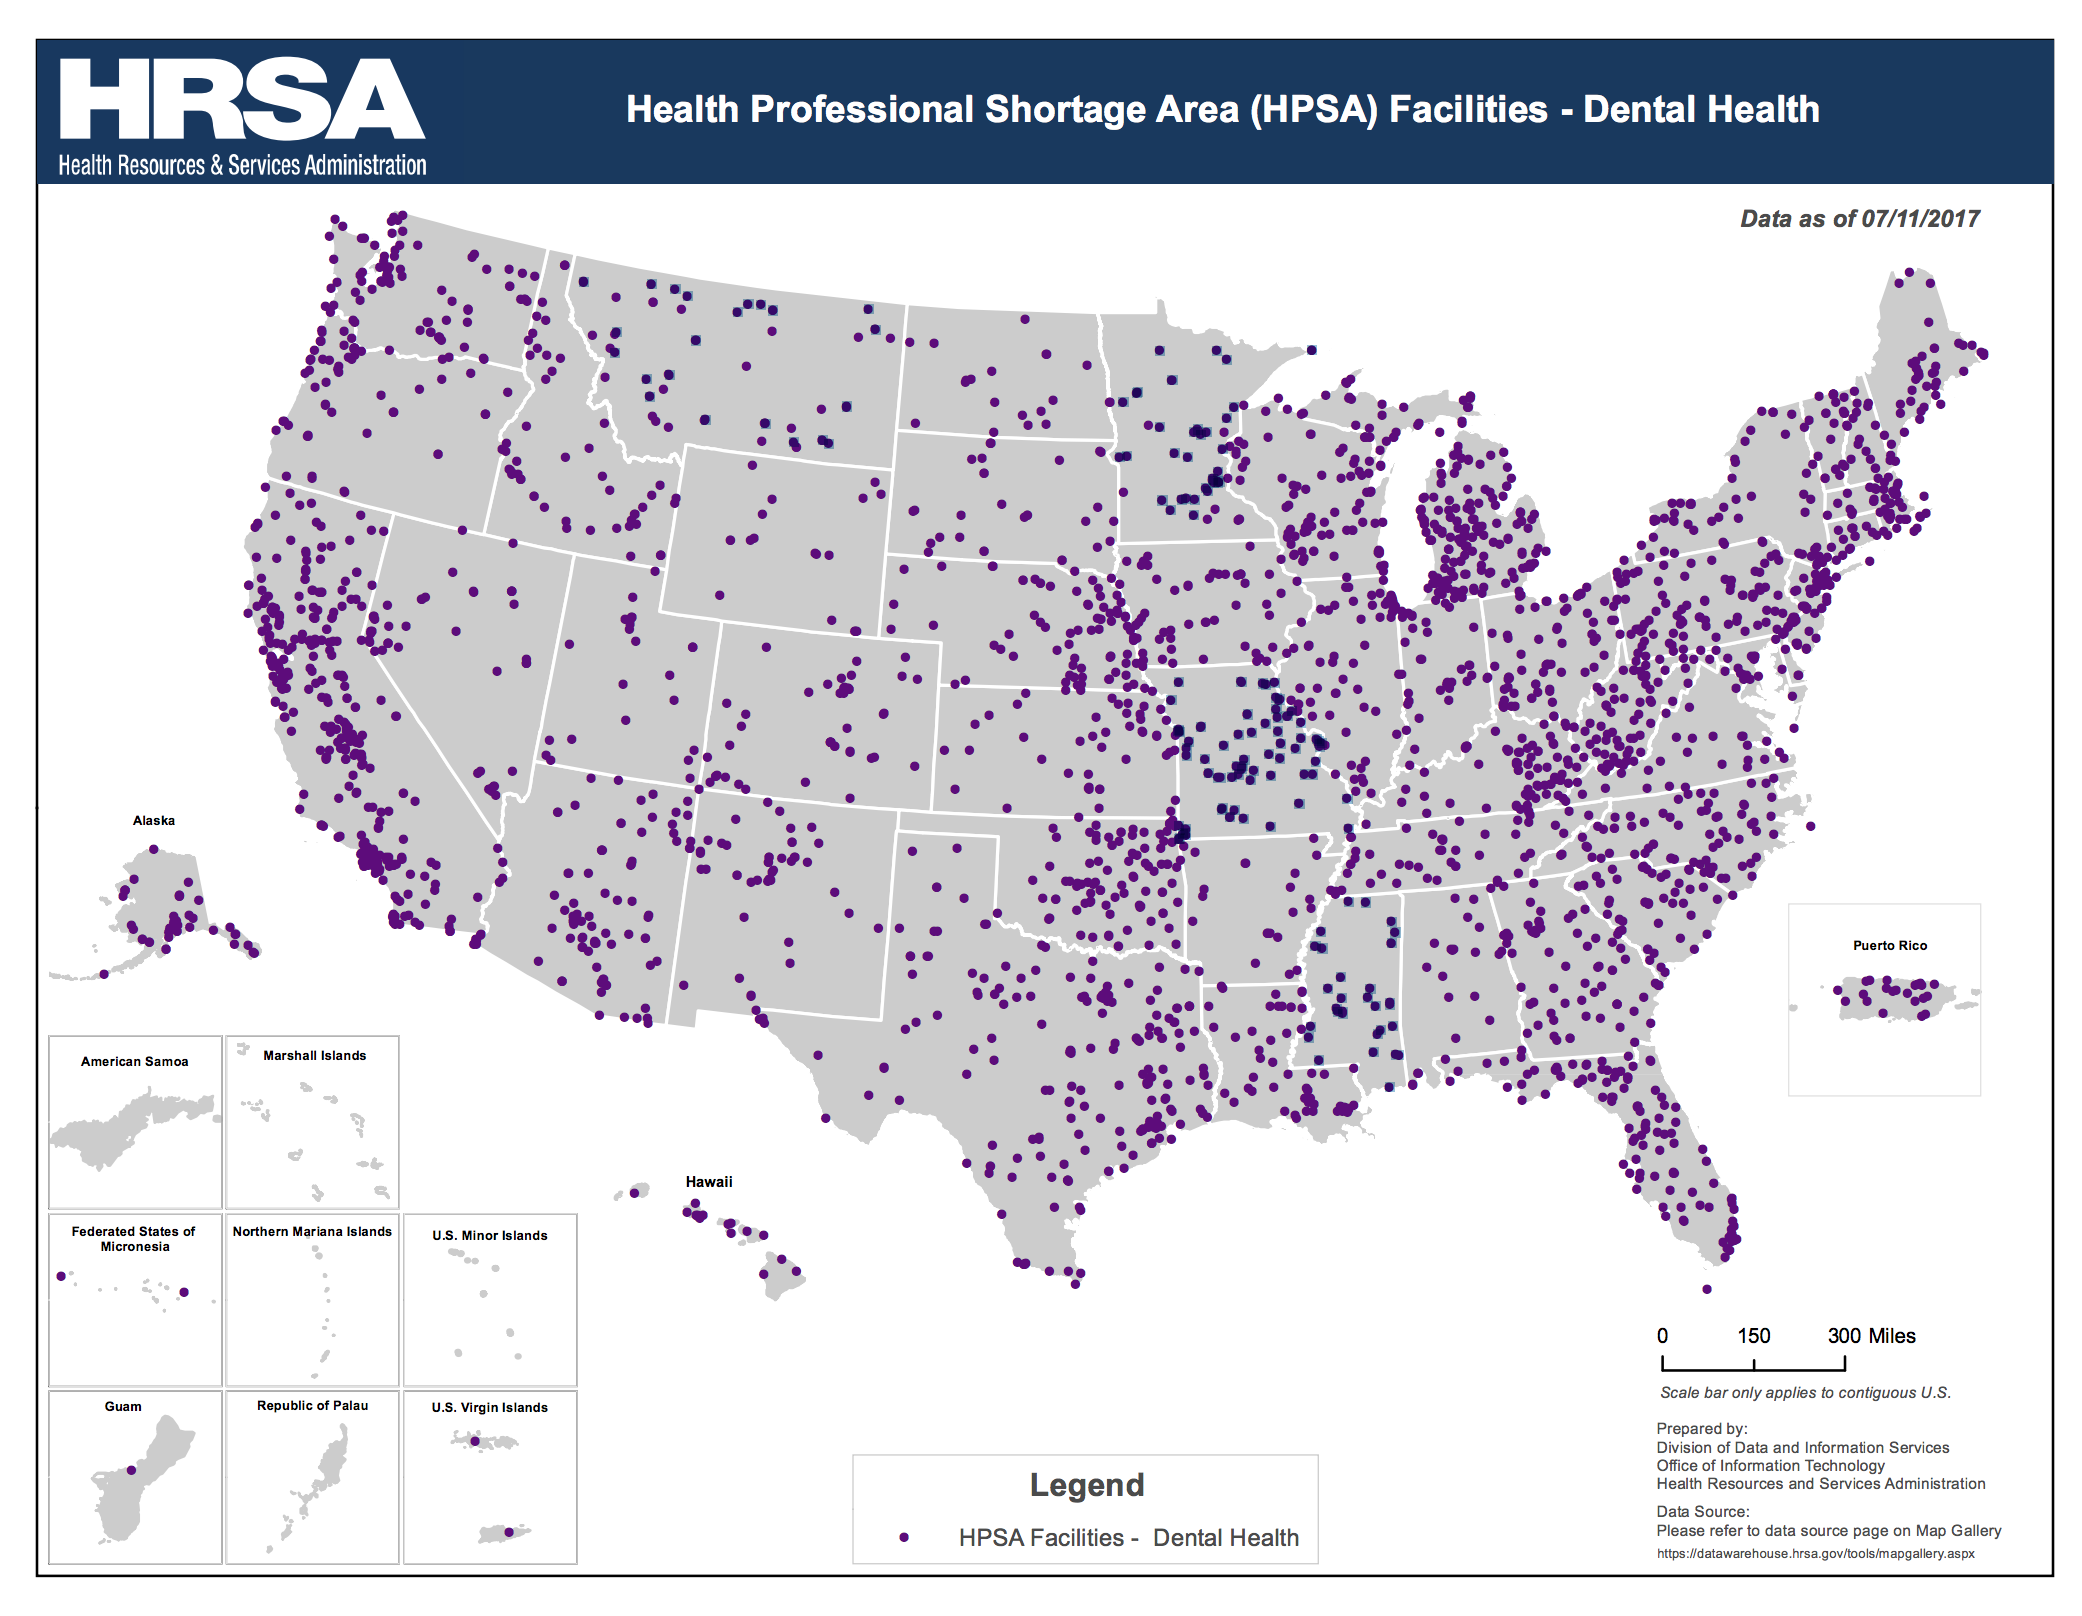 Map showing healthcare professional shortage areas in dental health